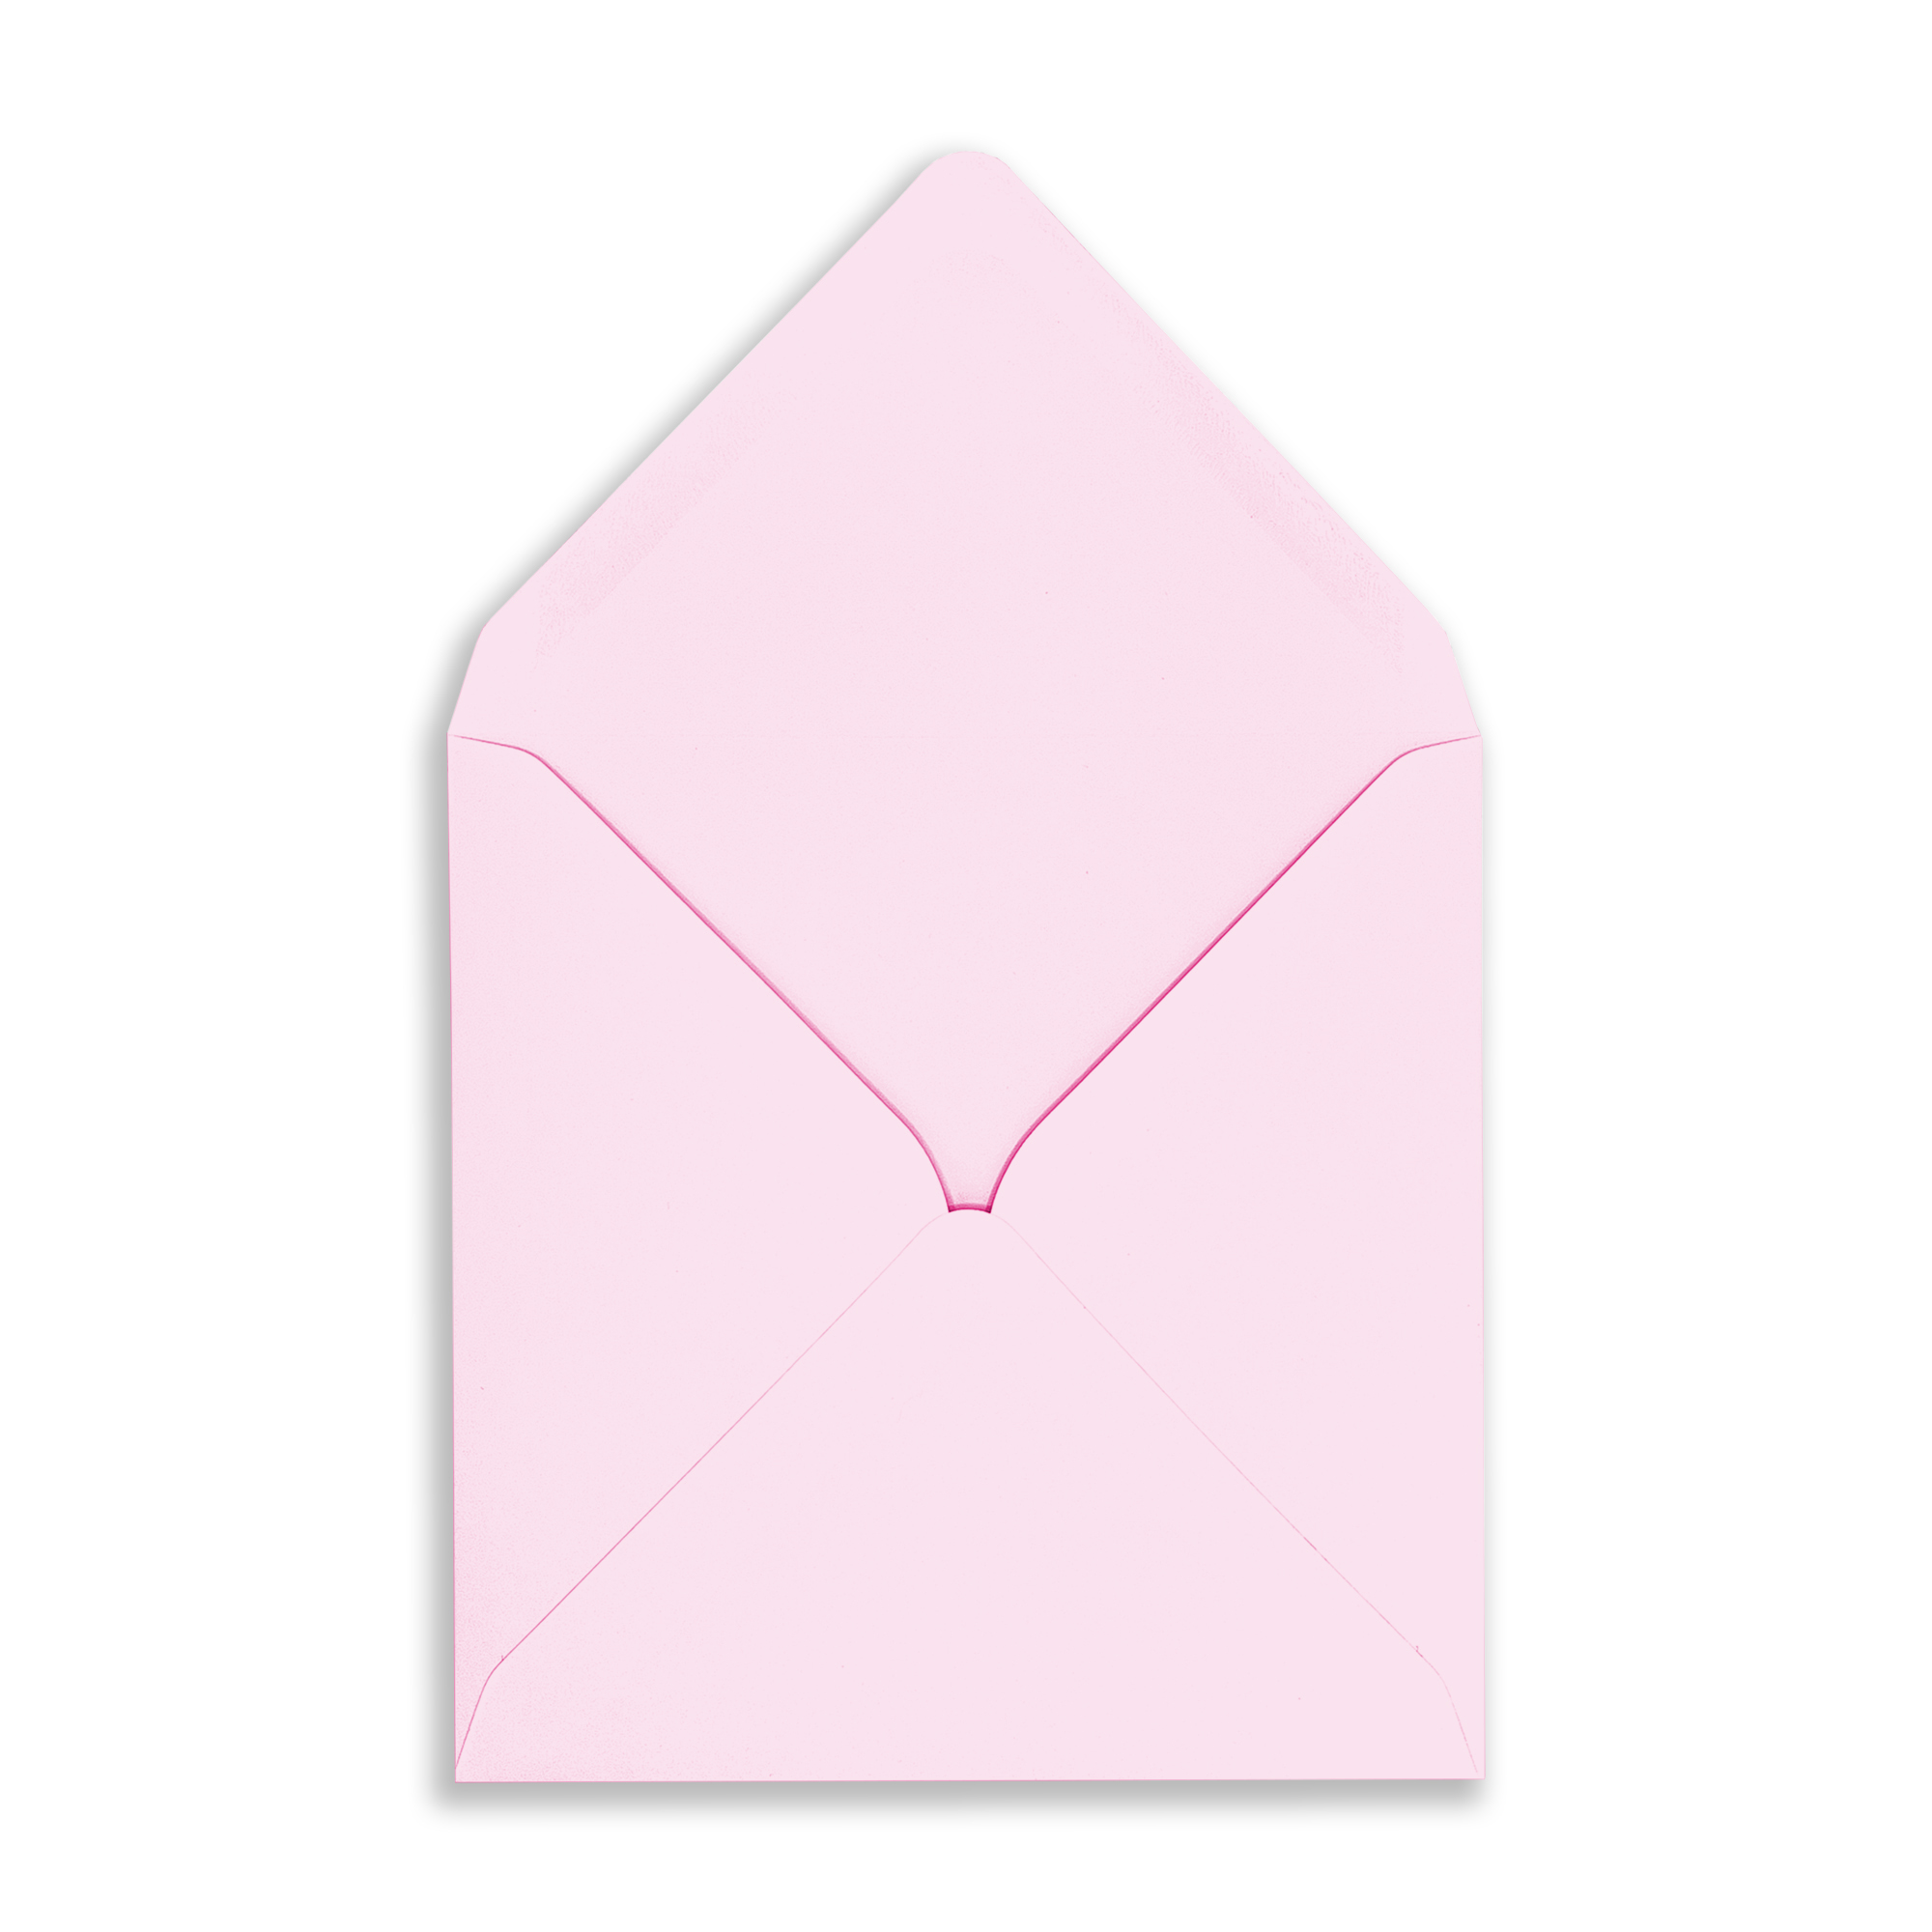 Candy_Floss_SQ_Envelope_OpenFlap